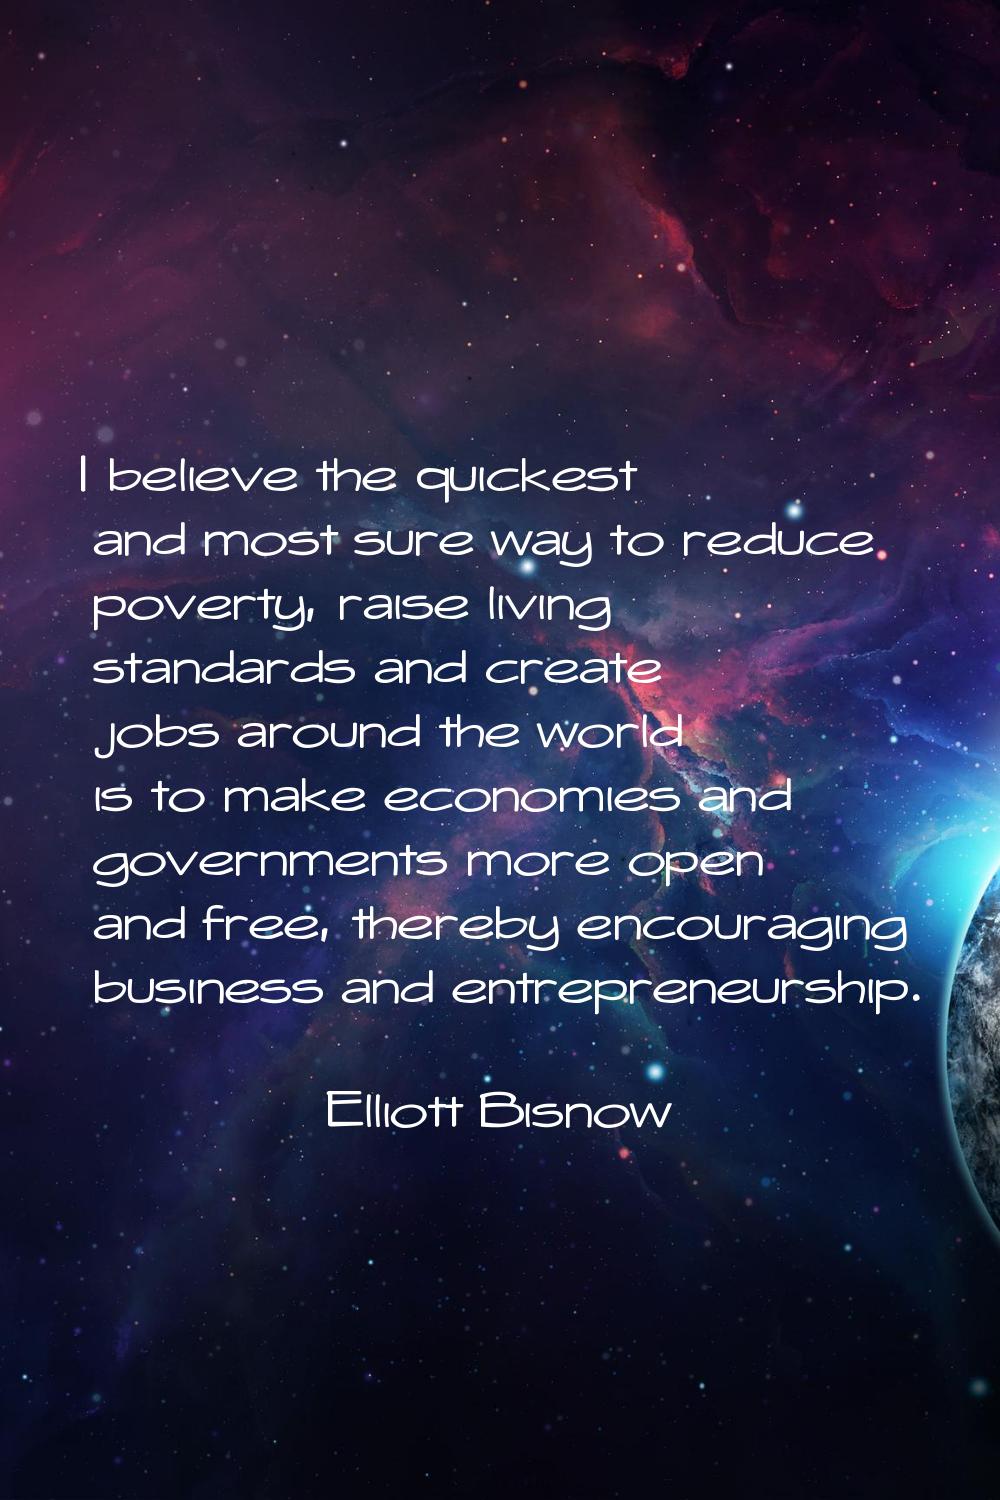 I believe the quickest and most sure way to reduce poverty, raise living standards and create jobs 